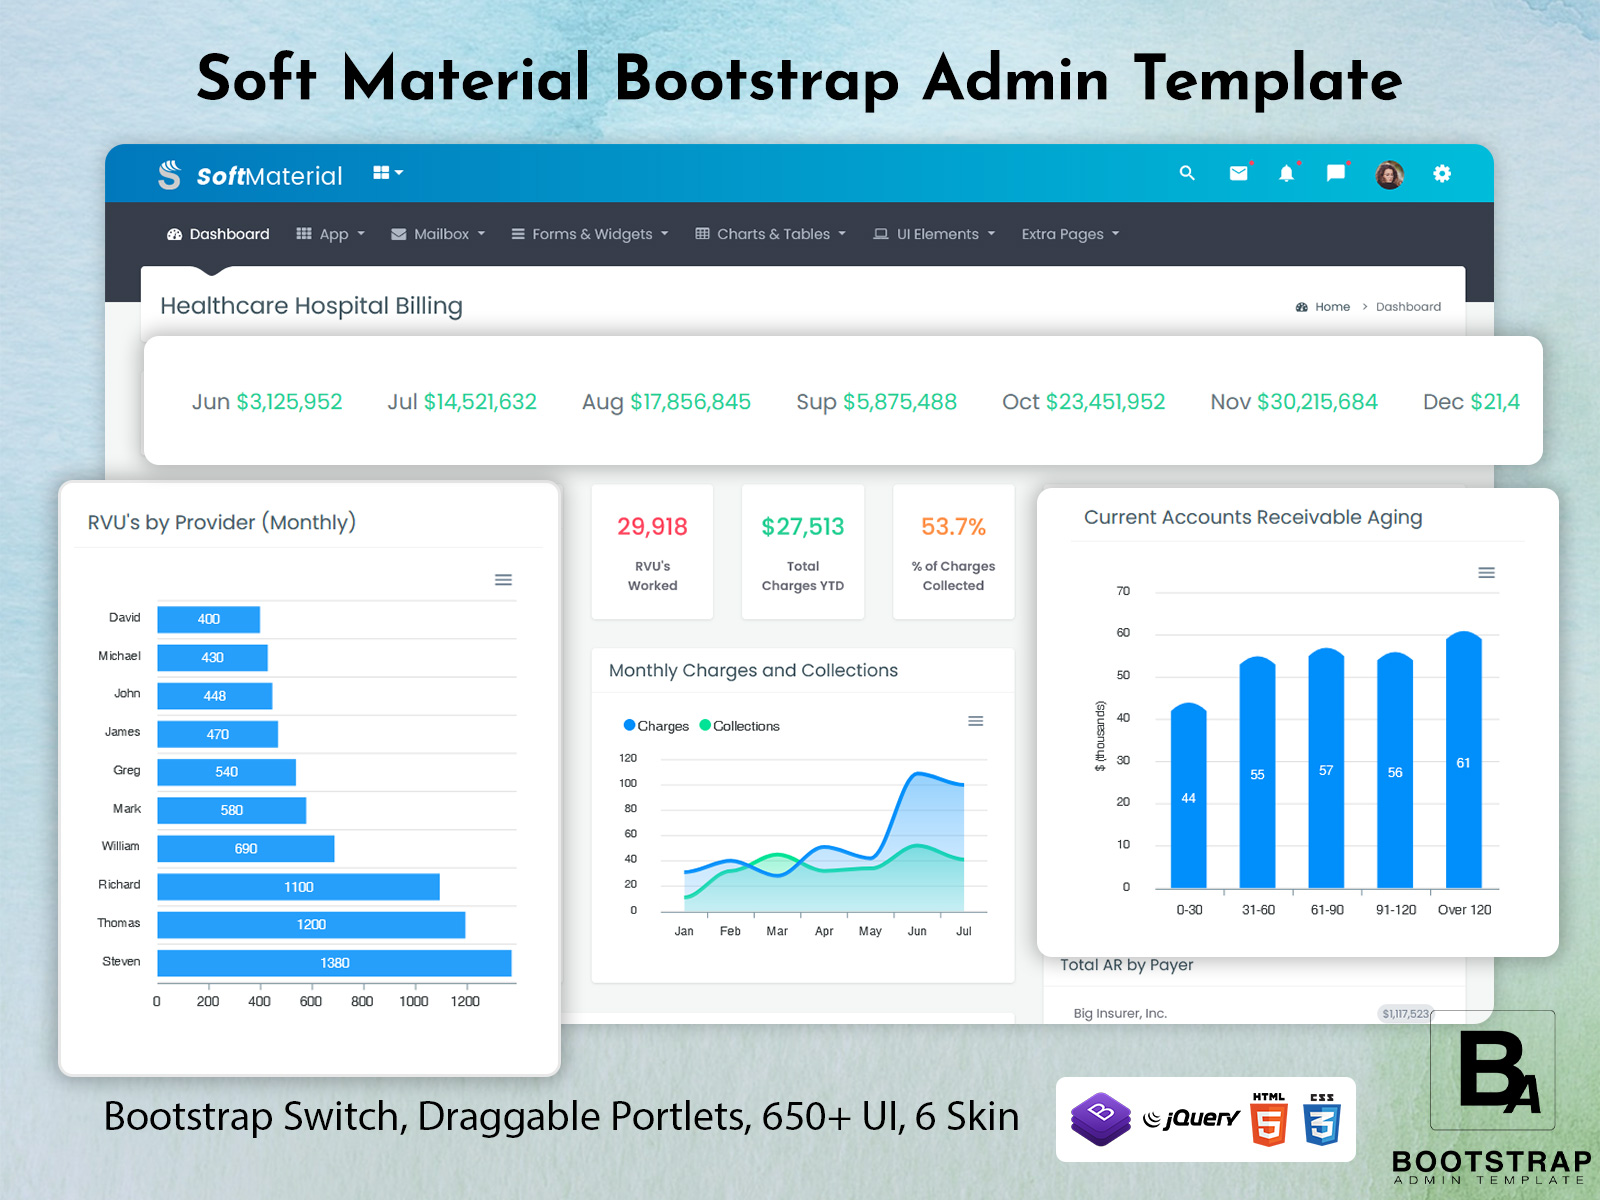 Streamline Your Workflow With A Bootstrap Admin Web App – Soft Material